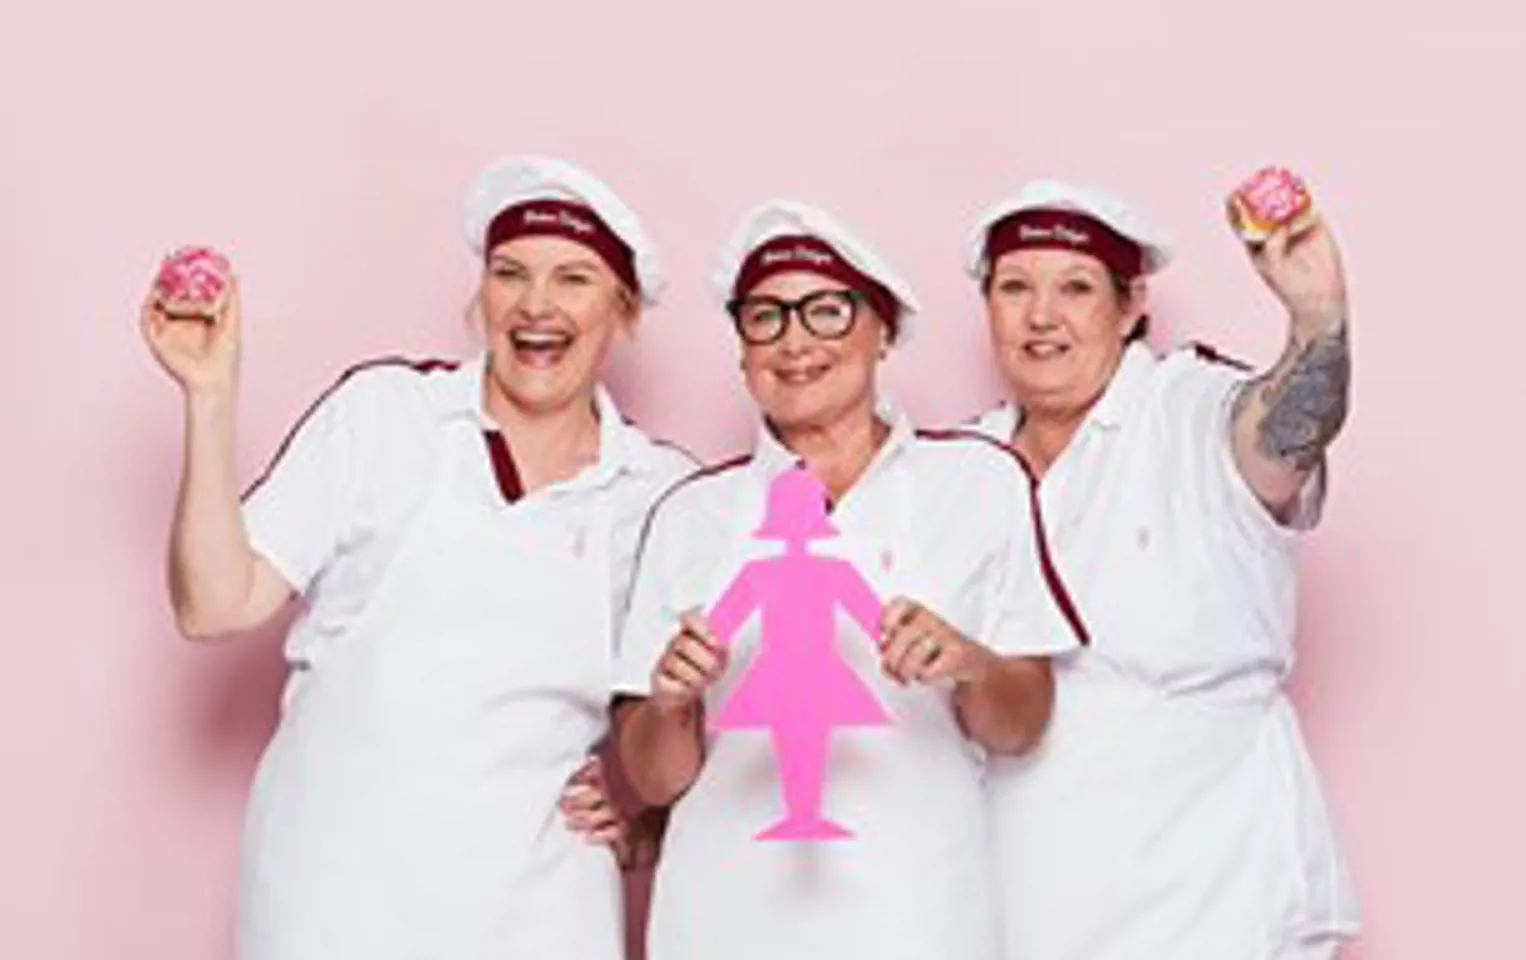 Photo of three Bakers Delight franchisees, Donna, Holly and Kim, who are smiling and dressed in white uniform and caps